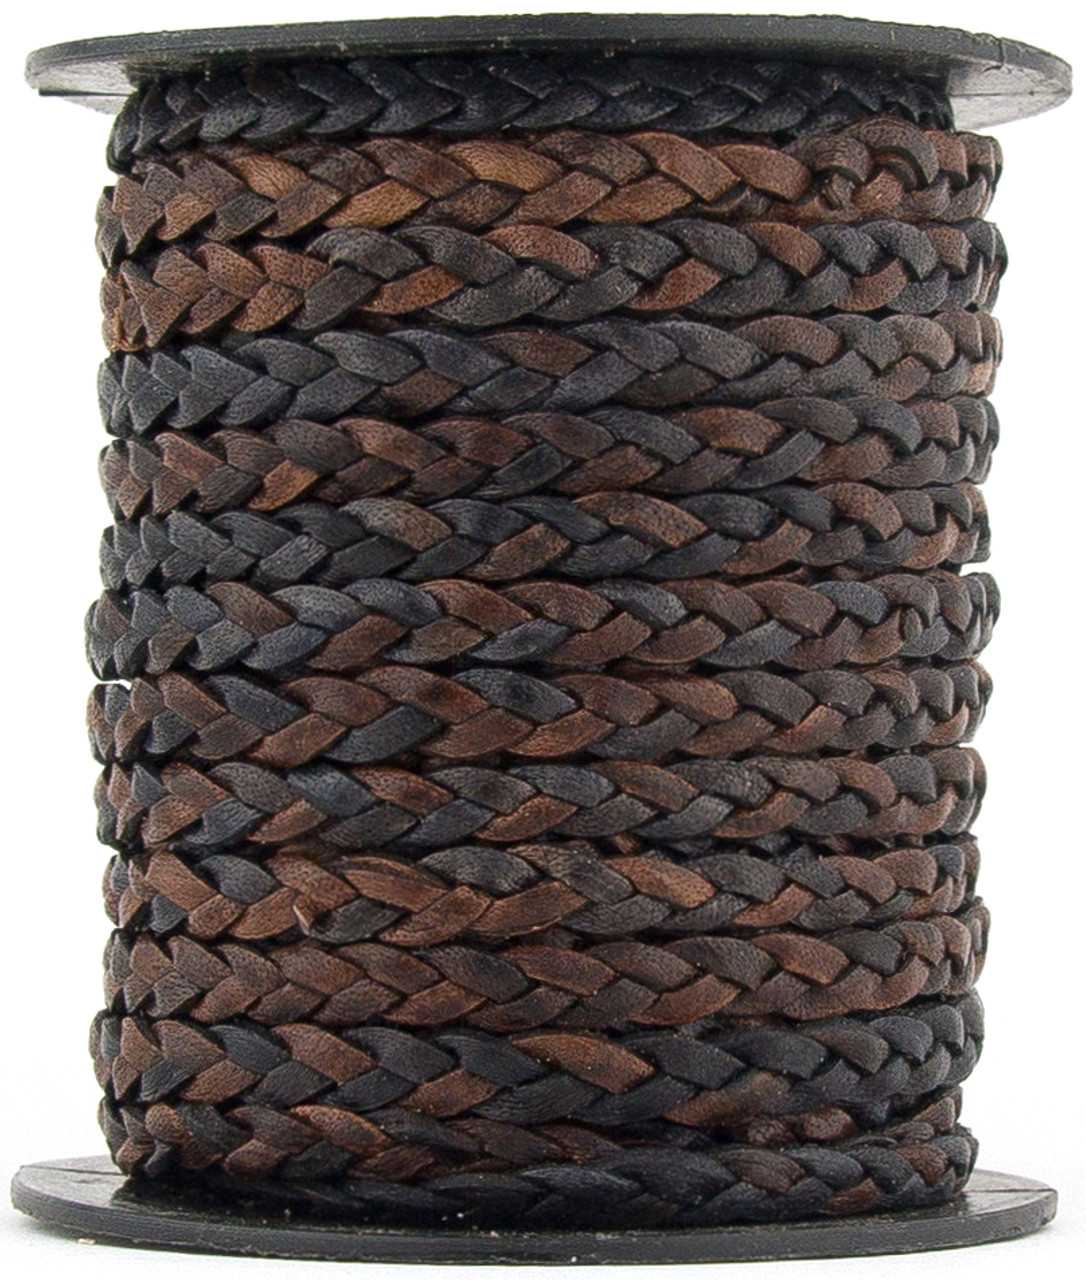 Xsotica Gypsy Sippa Natural Flat Braided Leather Cord 5 mm